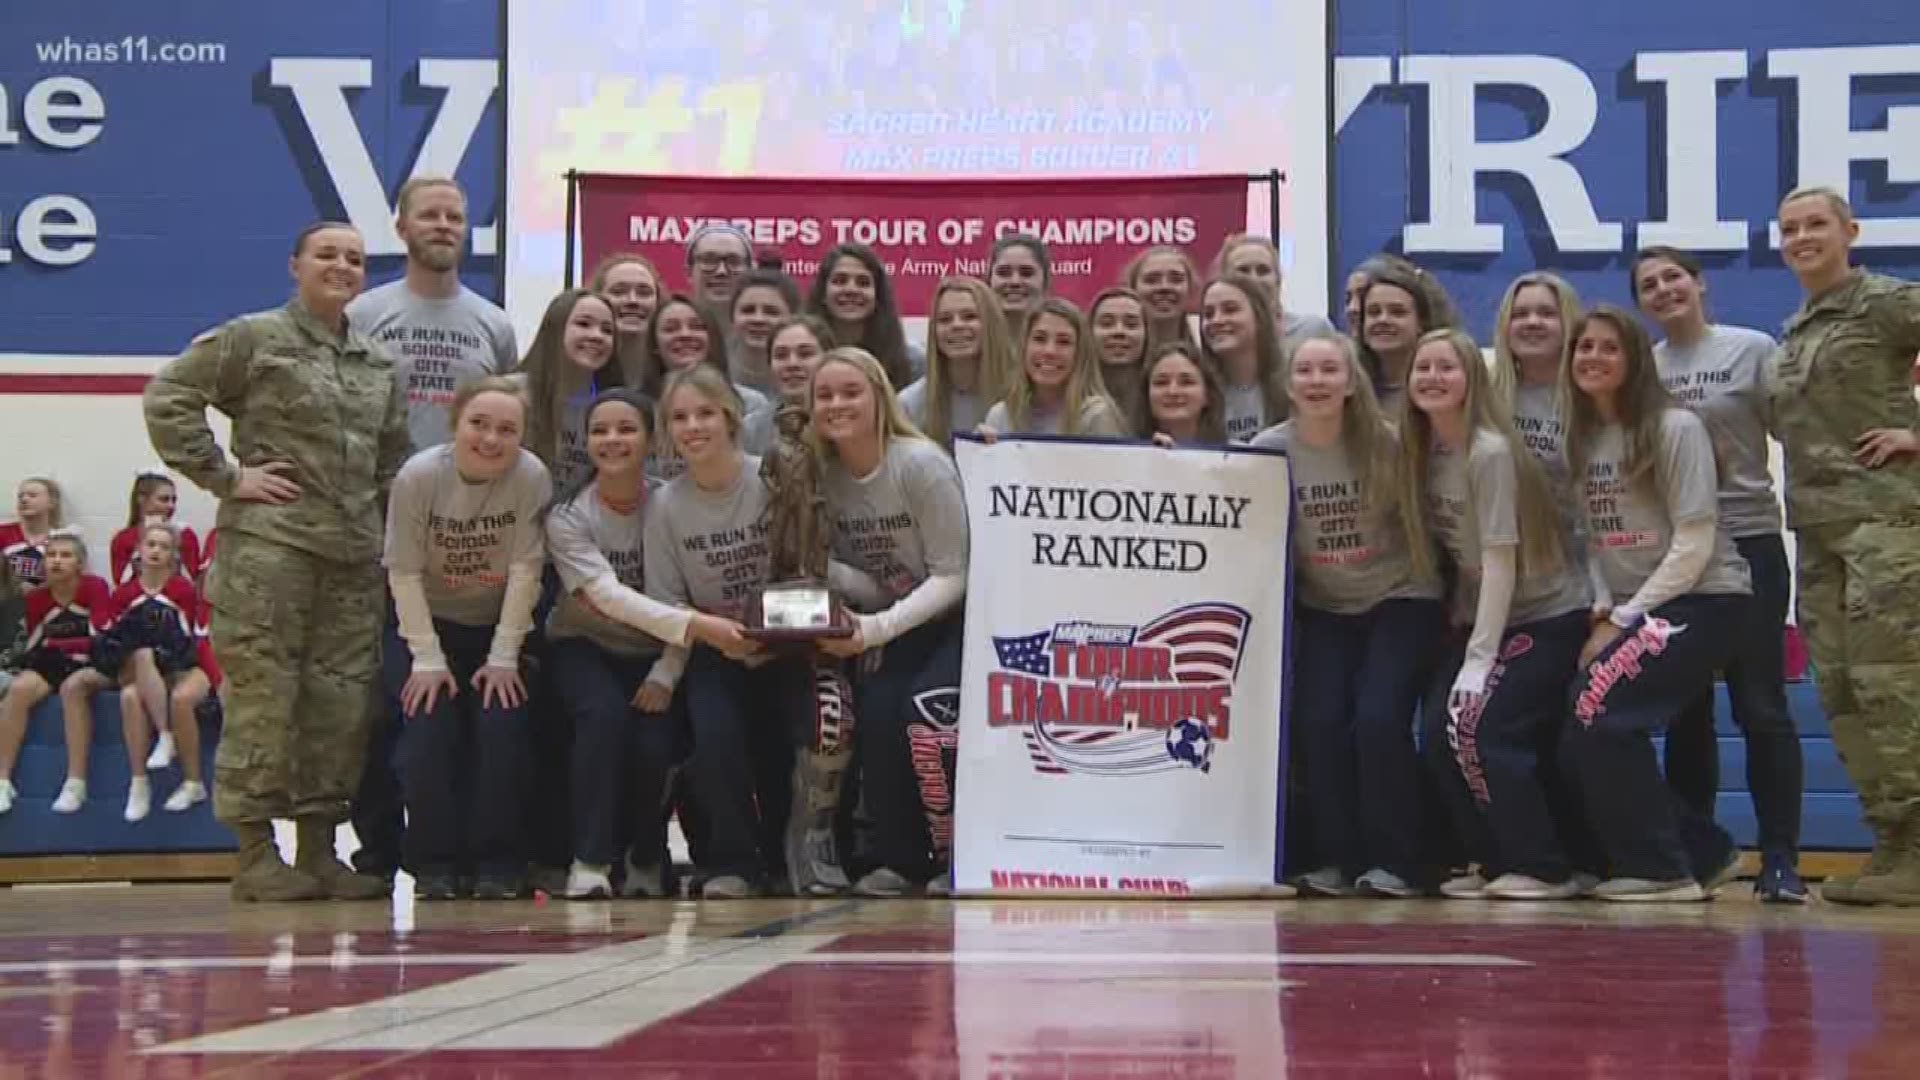 The Sacred Heart soccer team was presented their national championship trophy by Max Preps.
Sacred Heart finished this past season 25-1-1 capping it off with their sixth state title.